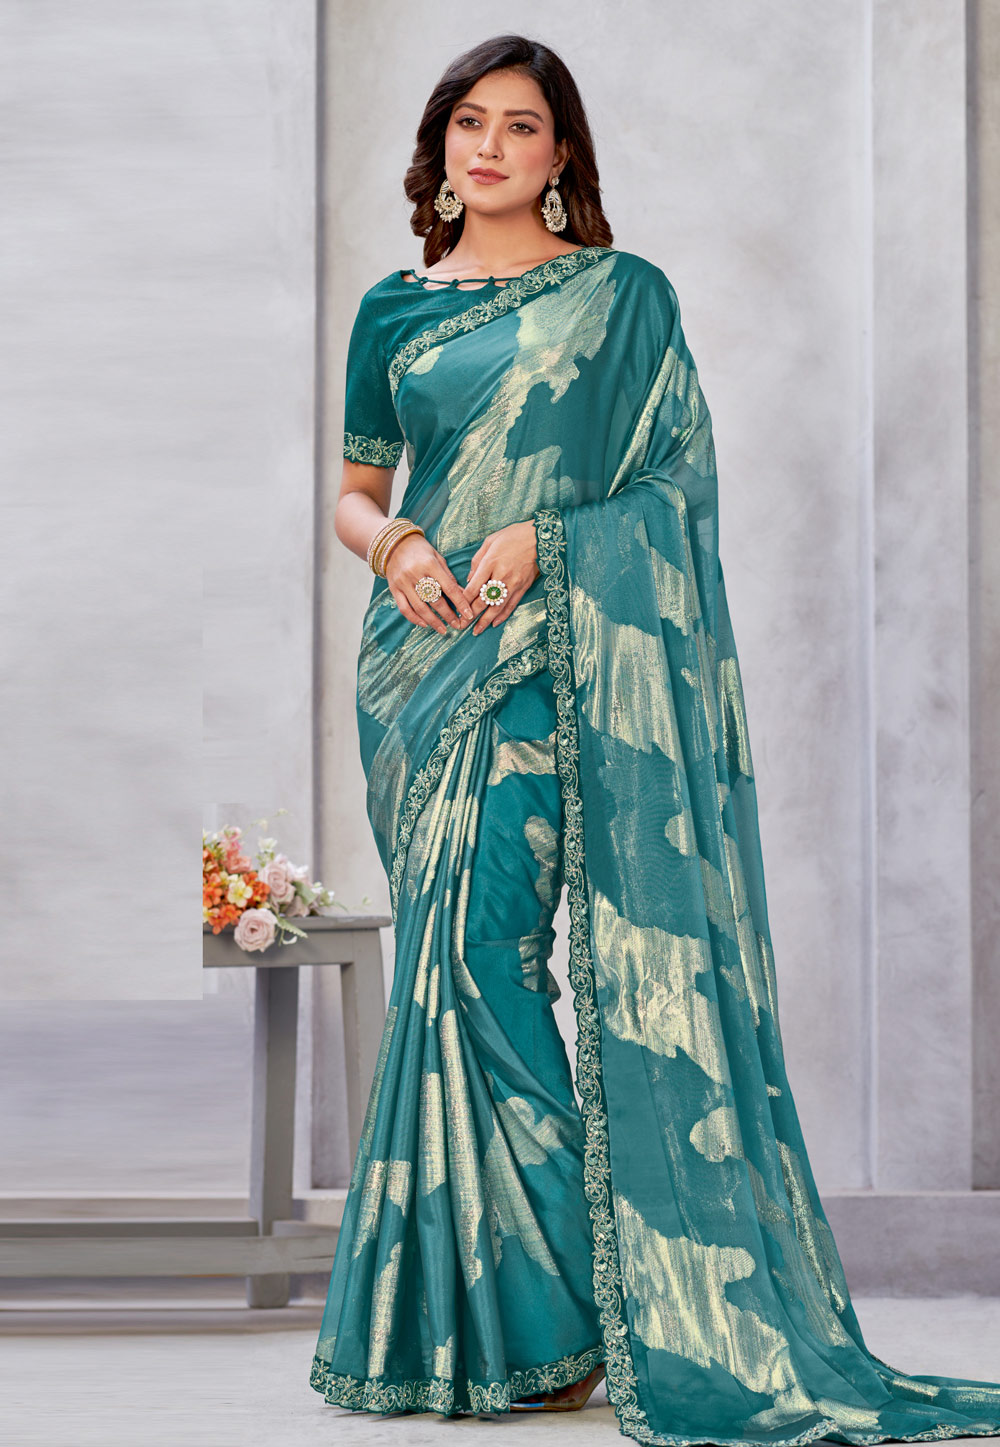 Teal Georgette Jacquard Saree With Blouse 283602